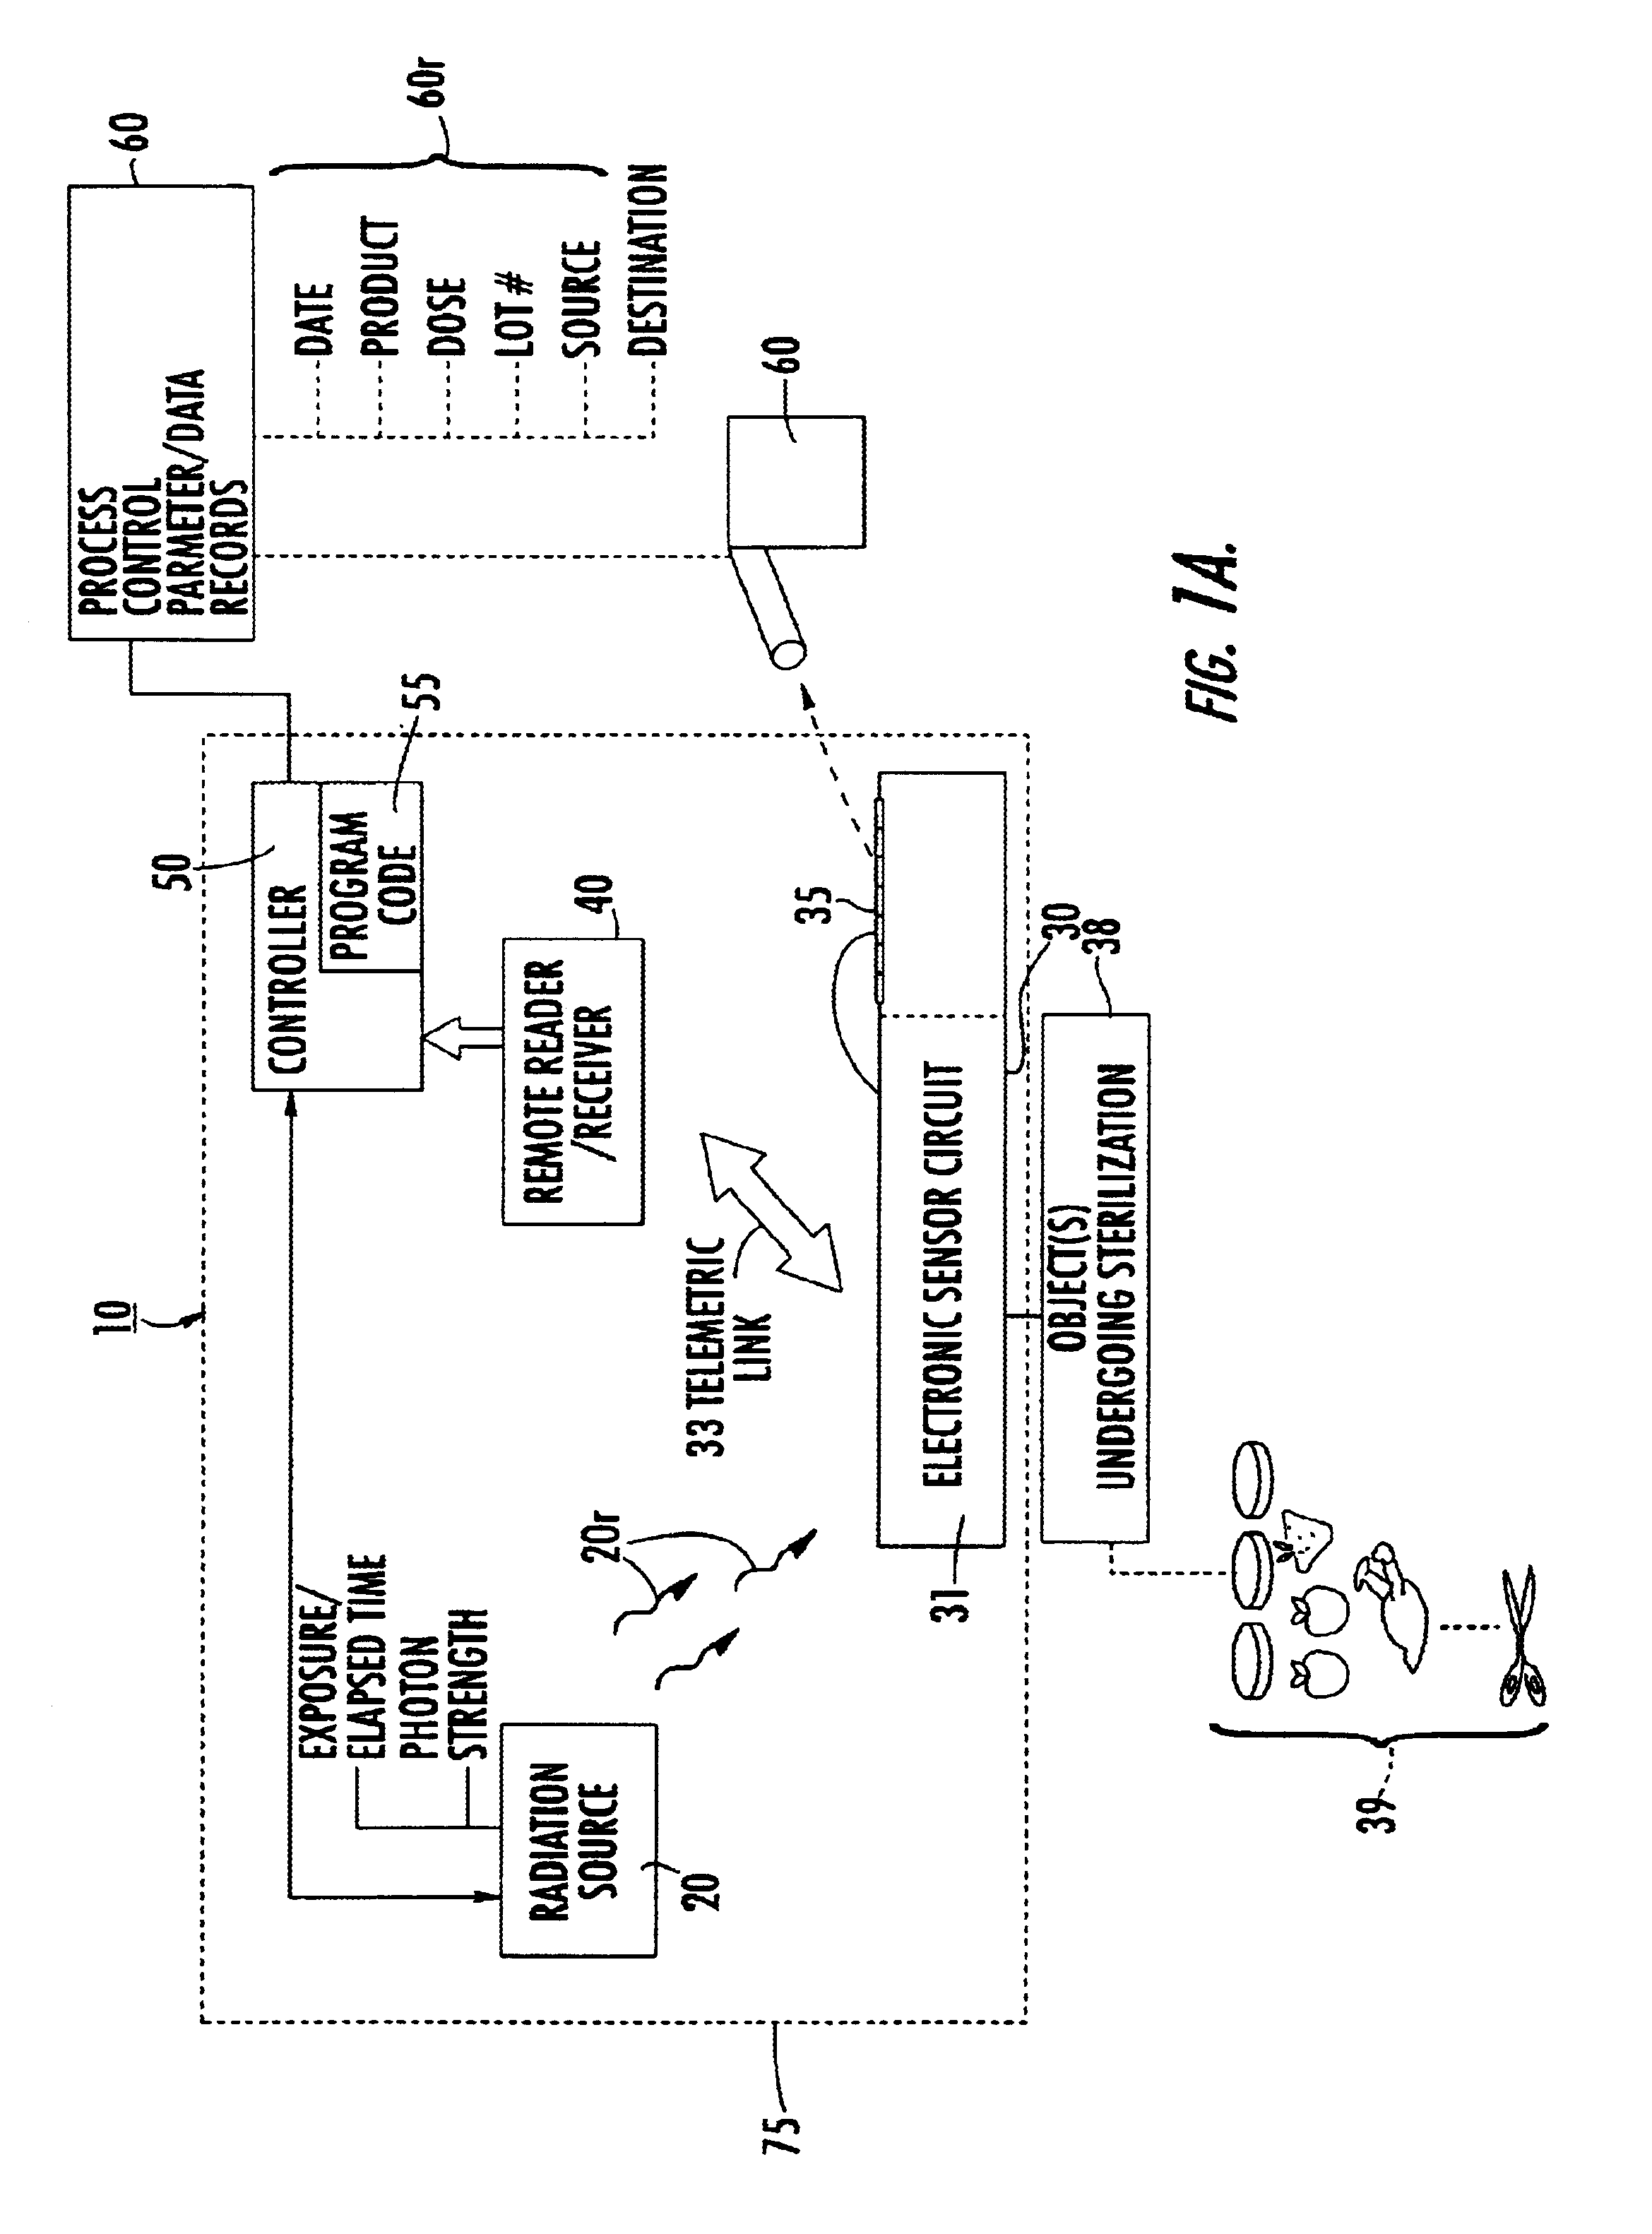 Evaluation of irradiated foods and other items with telemetric dosimeters and associated methods